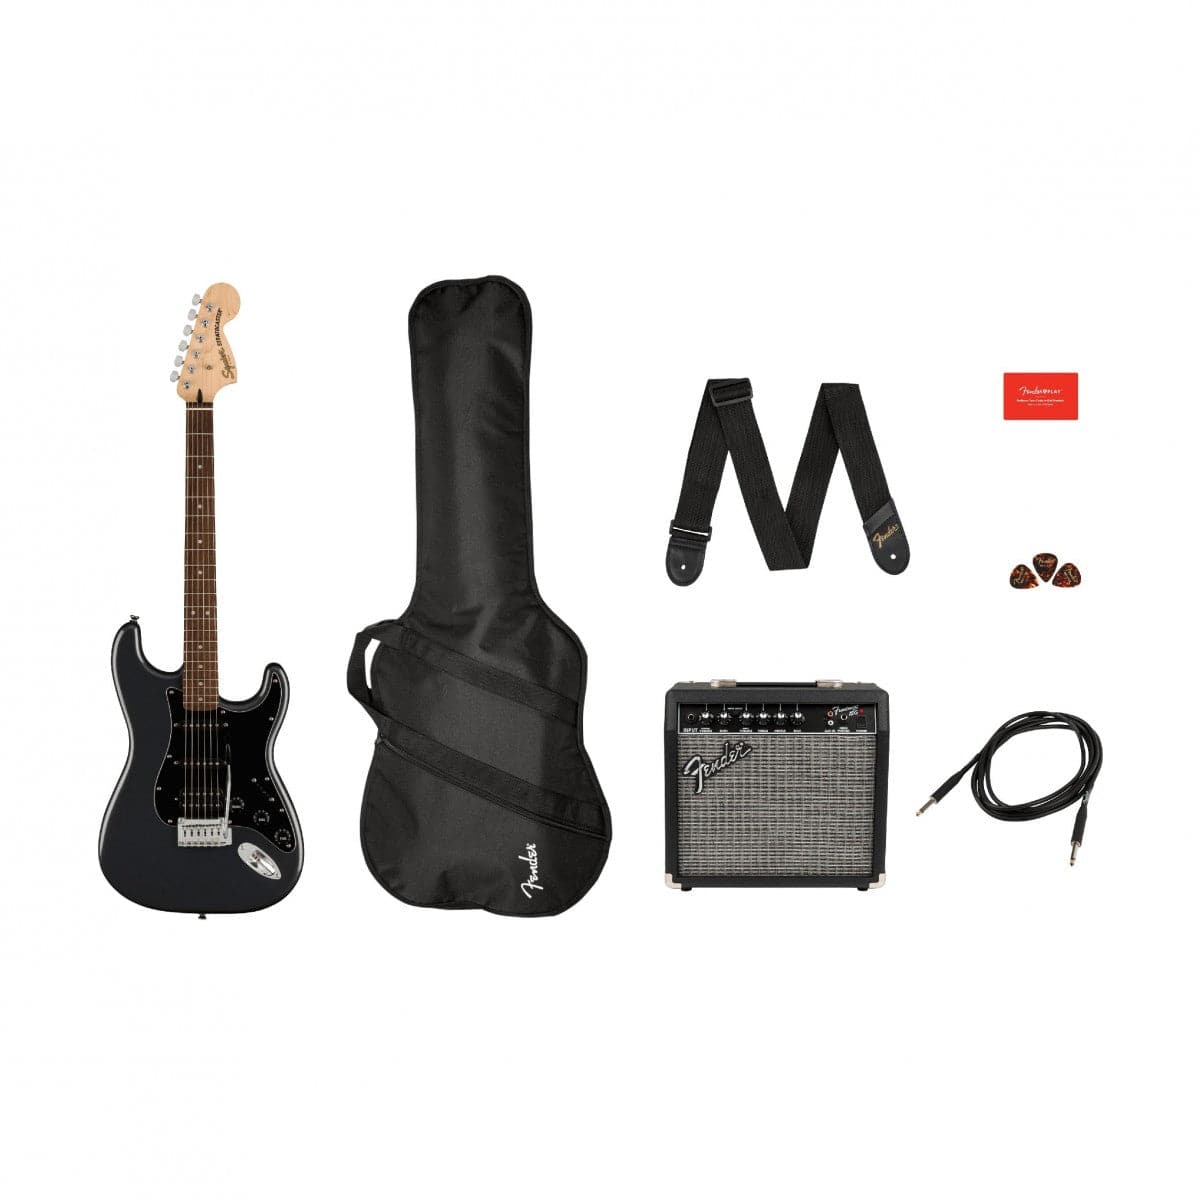 Squier Affinity Stratocaster Electric Guitar Package HSS - Guitar, Amp, Cable, Strap, Picks & Lessons - Charcoal Frost Metallic